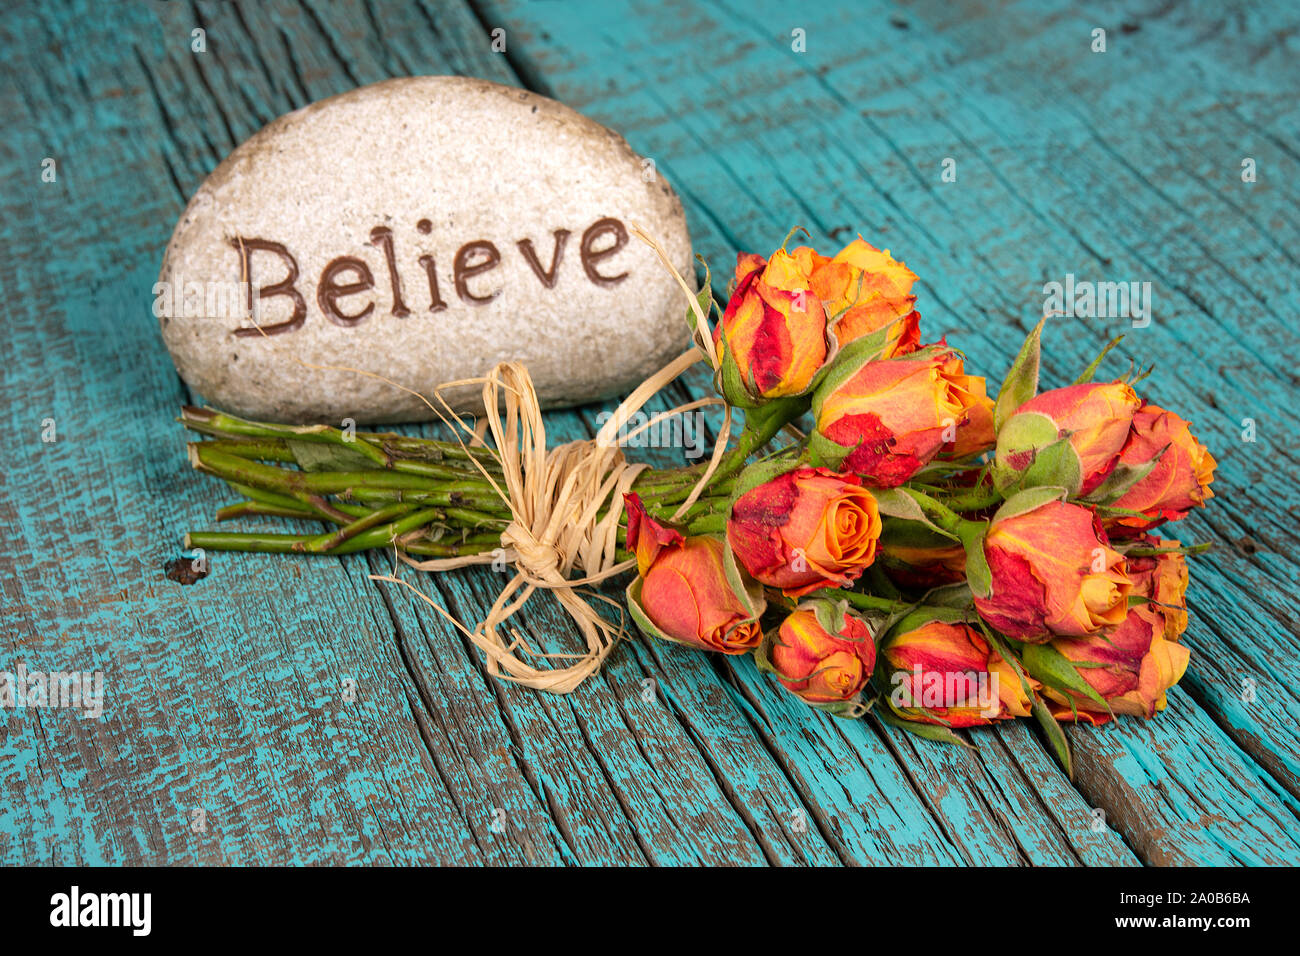 believe text on rock with orange rose bouquet on rustic turquoise painted wood Stock Photo